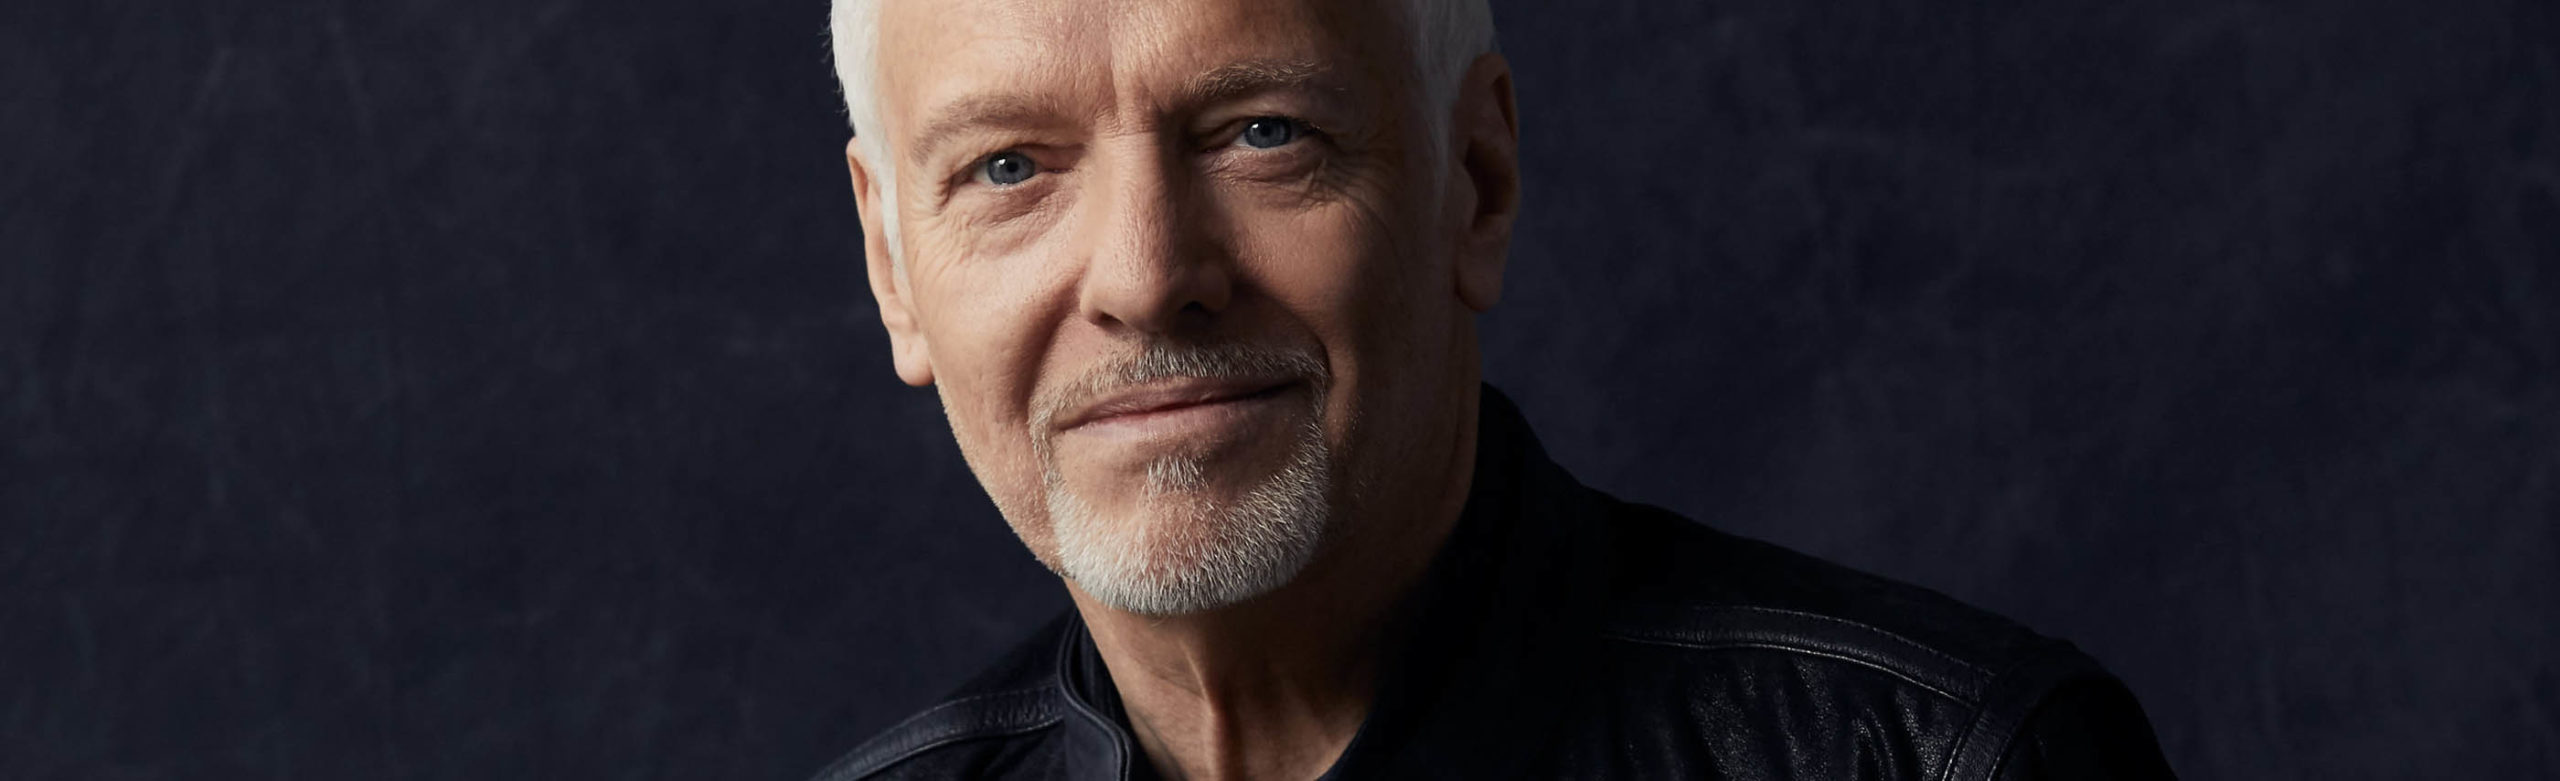 Event Info: Peter Frampton at The Wilma Image